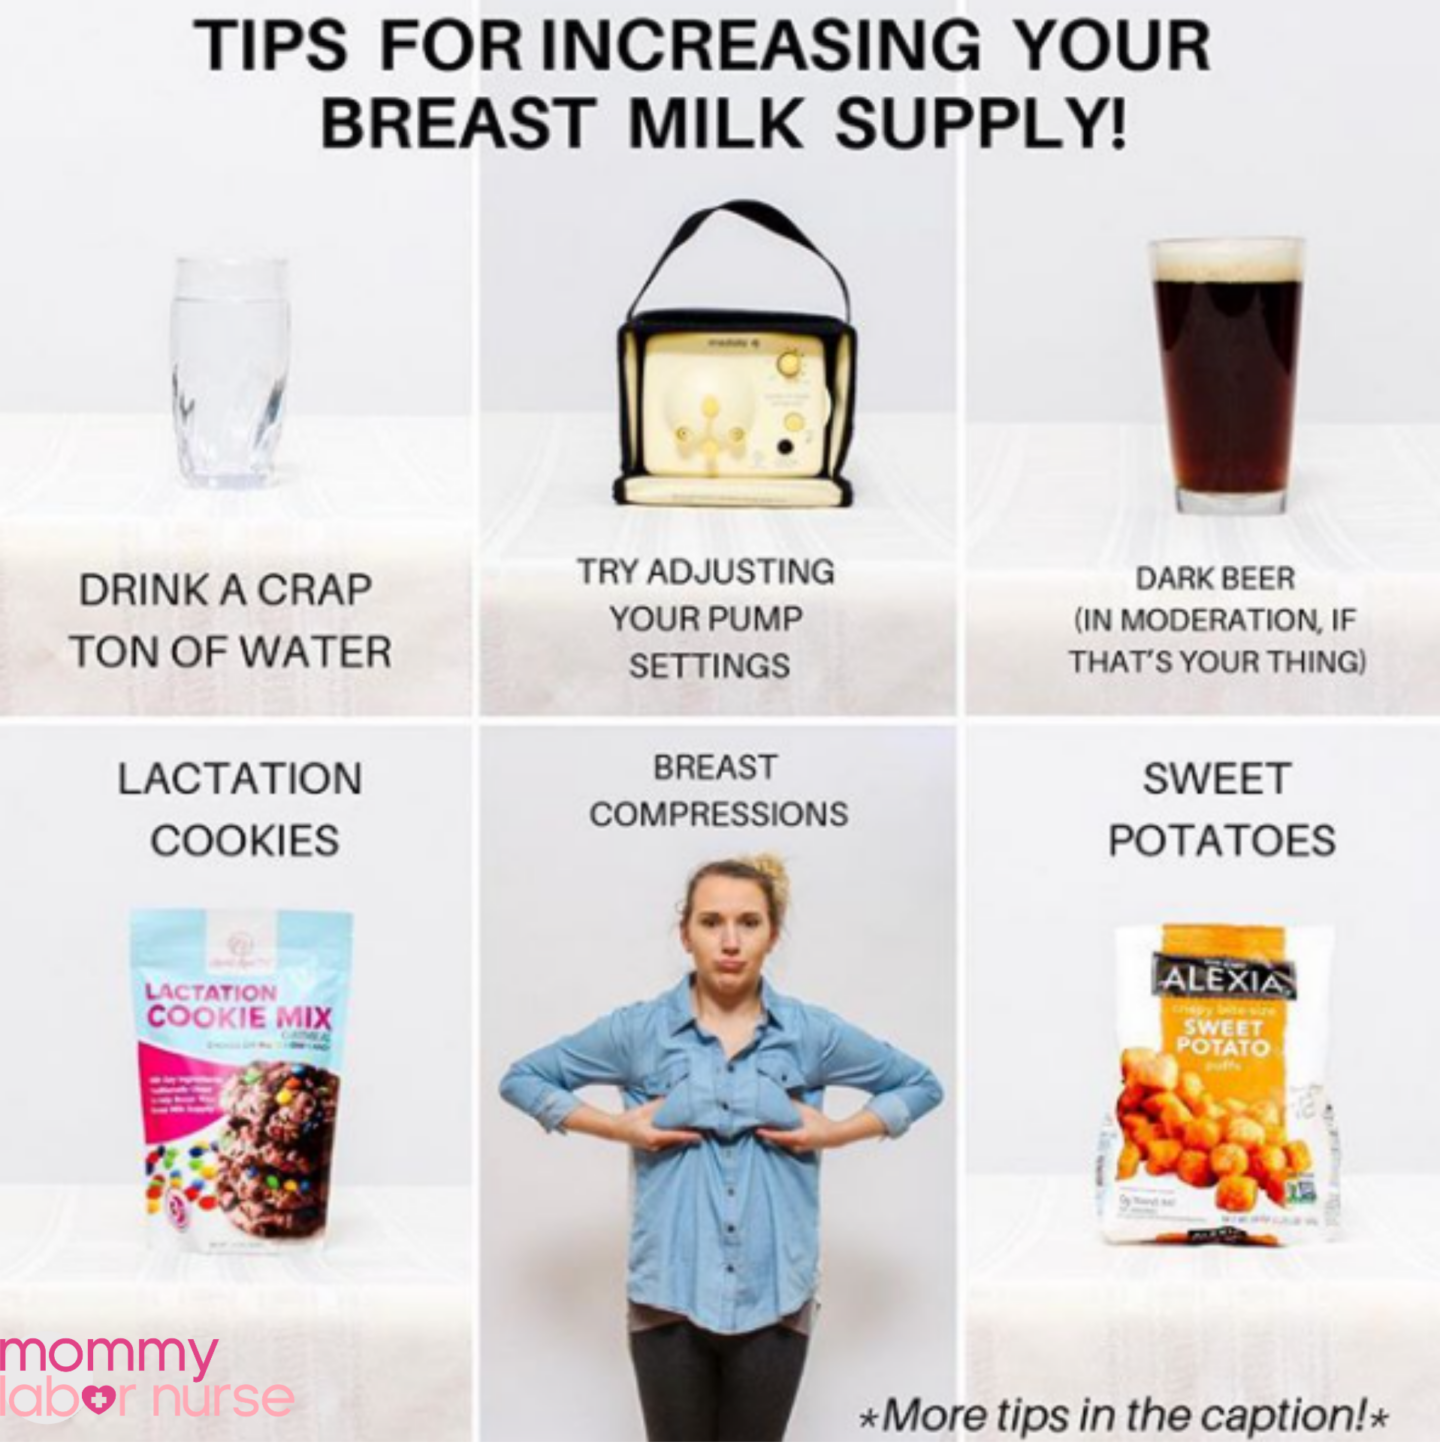 tip to increase milk supply infographic